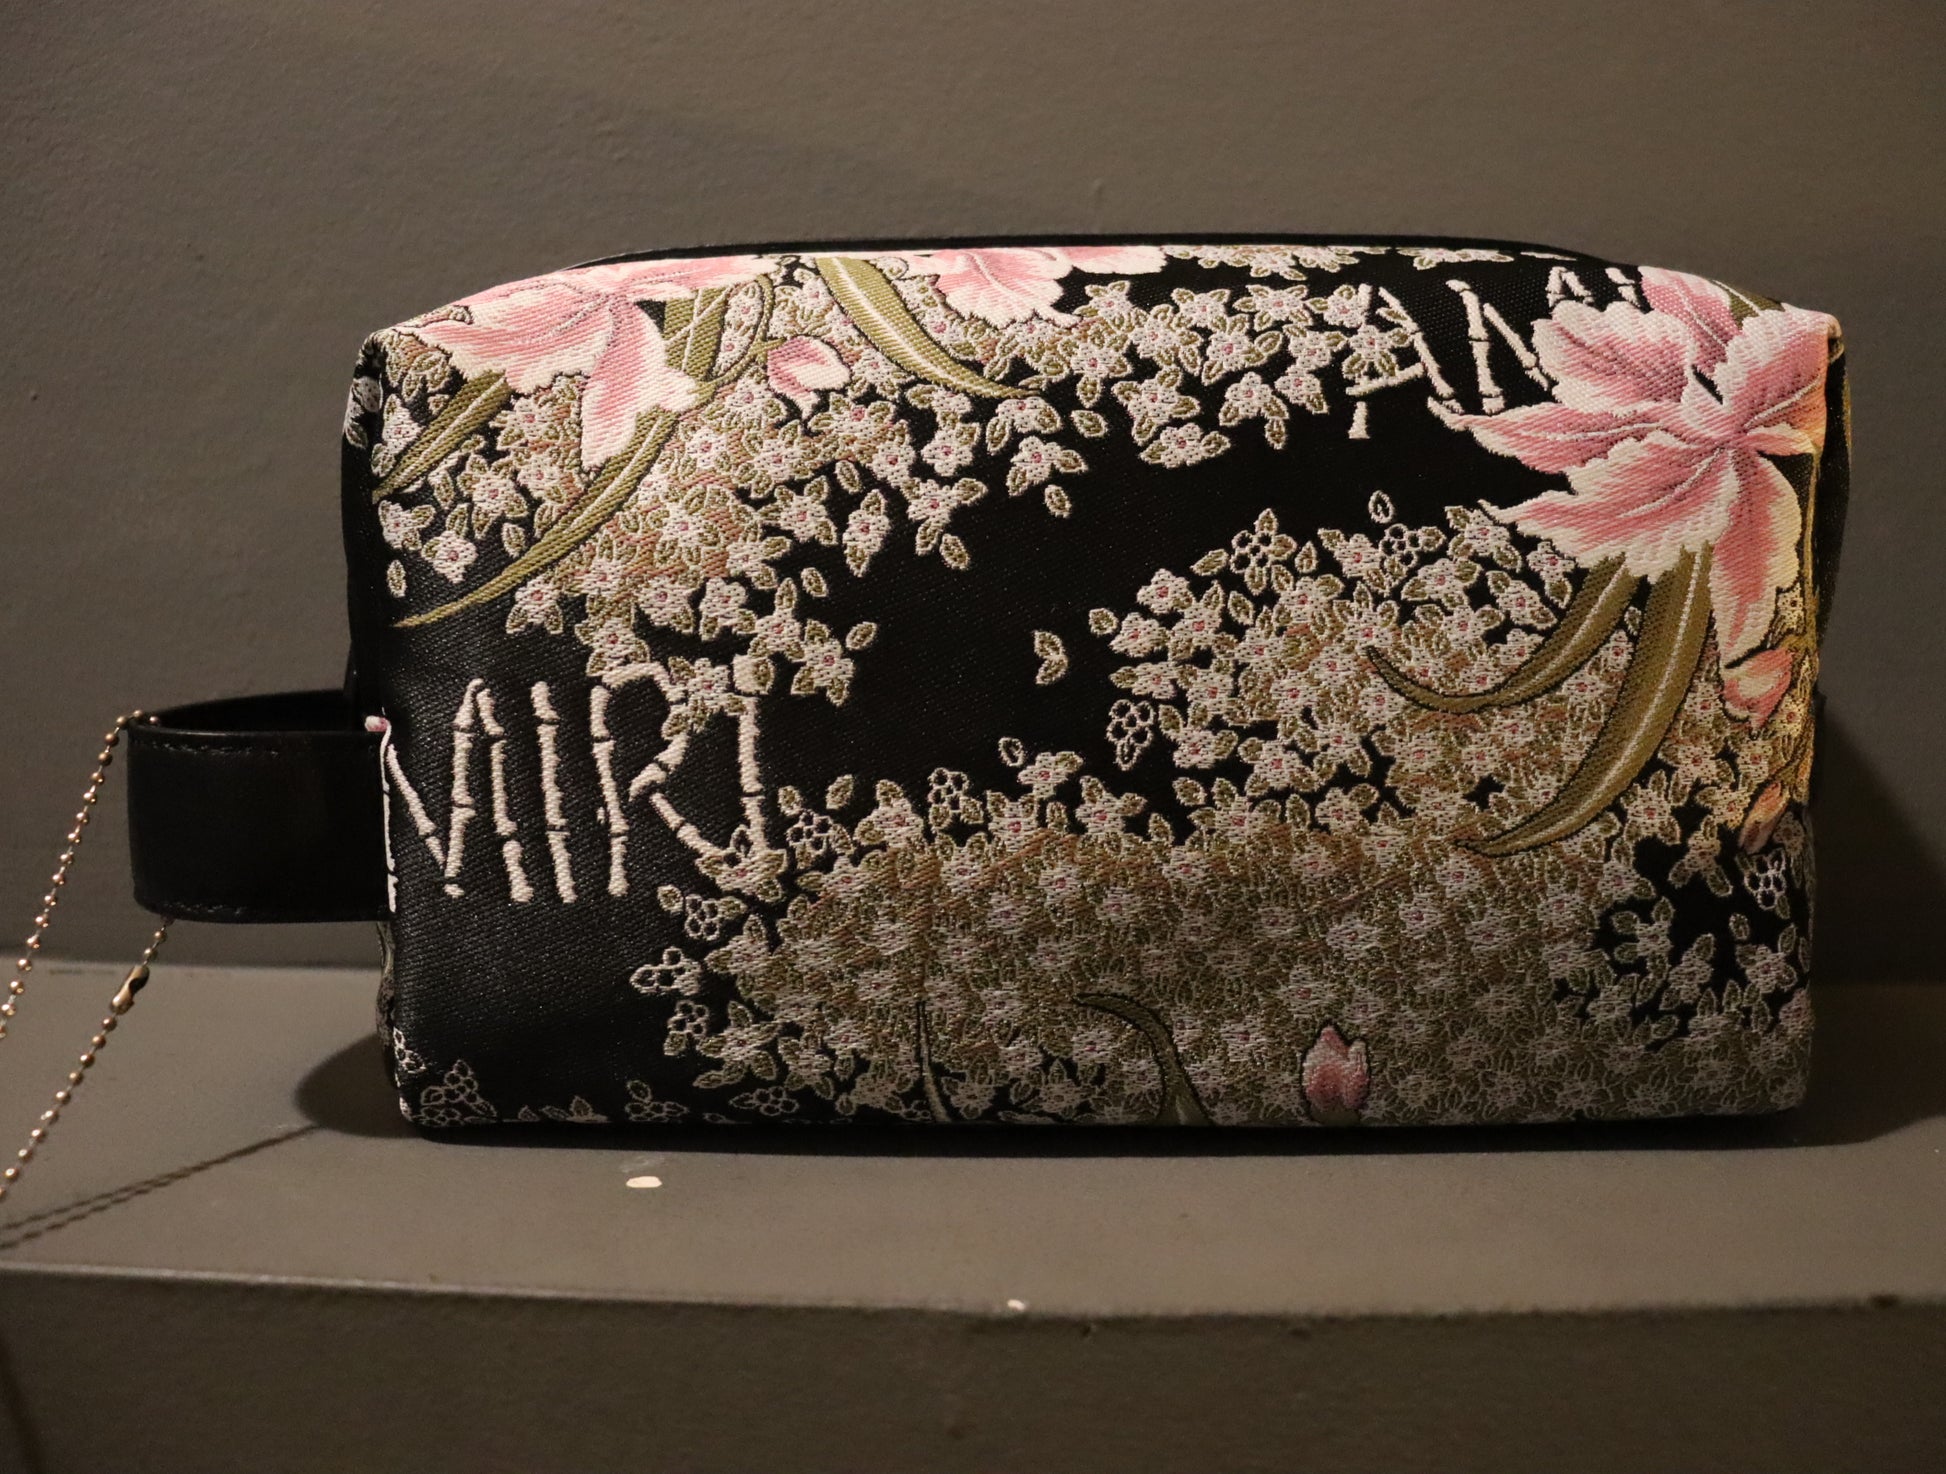 A stylish AMIRI Hibiscus Jacquard Dopp Kit in a multi-colored jacquard fabric, complemented by a twill lining and leather detailing. The AMIRI logo is embroidered on the kit. This kit comes in one size (O/S) and features a vibrant and eye-catching design.